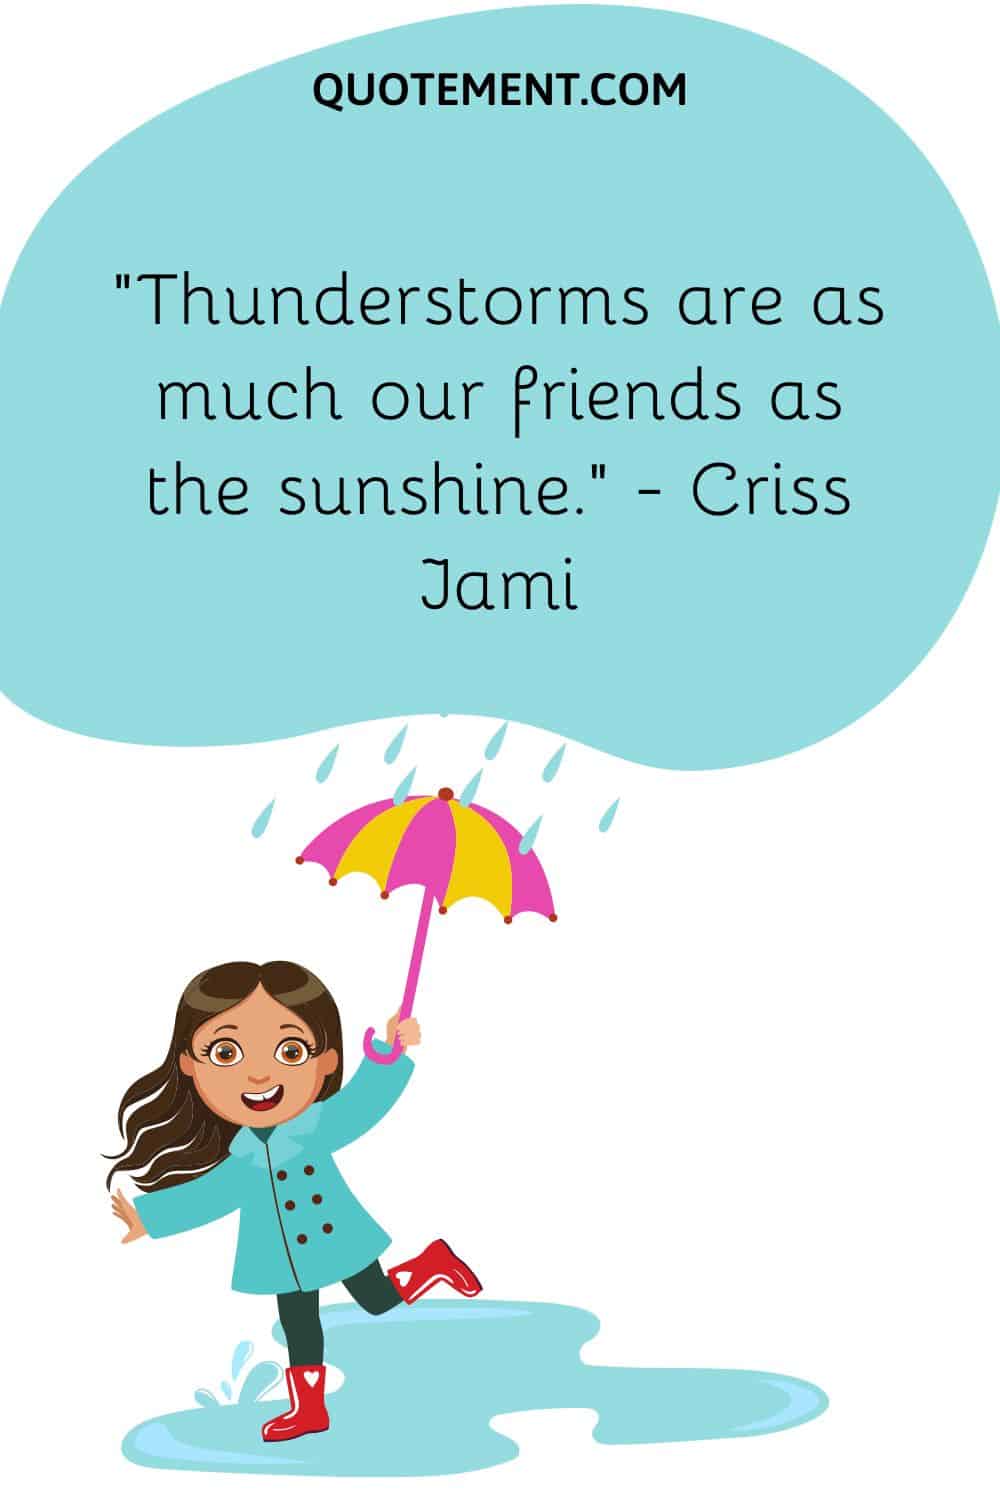 Thunderstorms are as much our friends as the sunshine